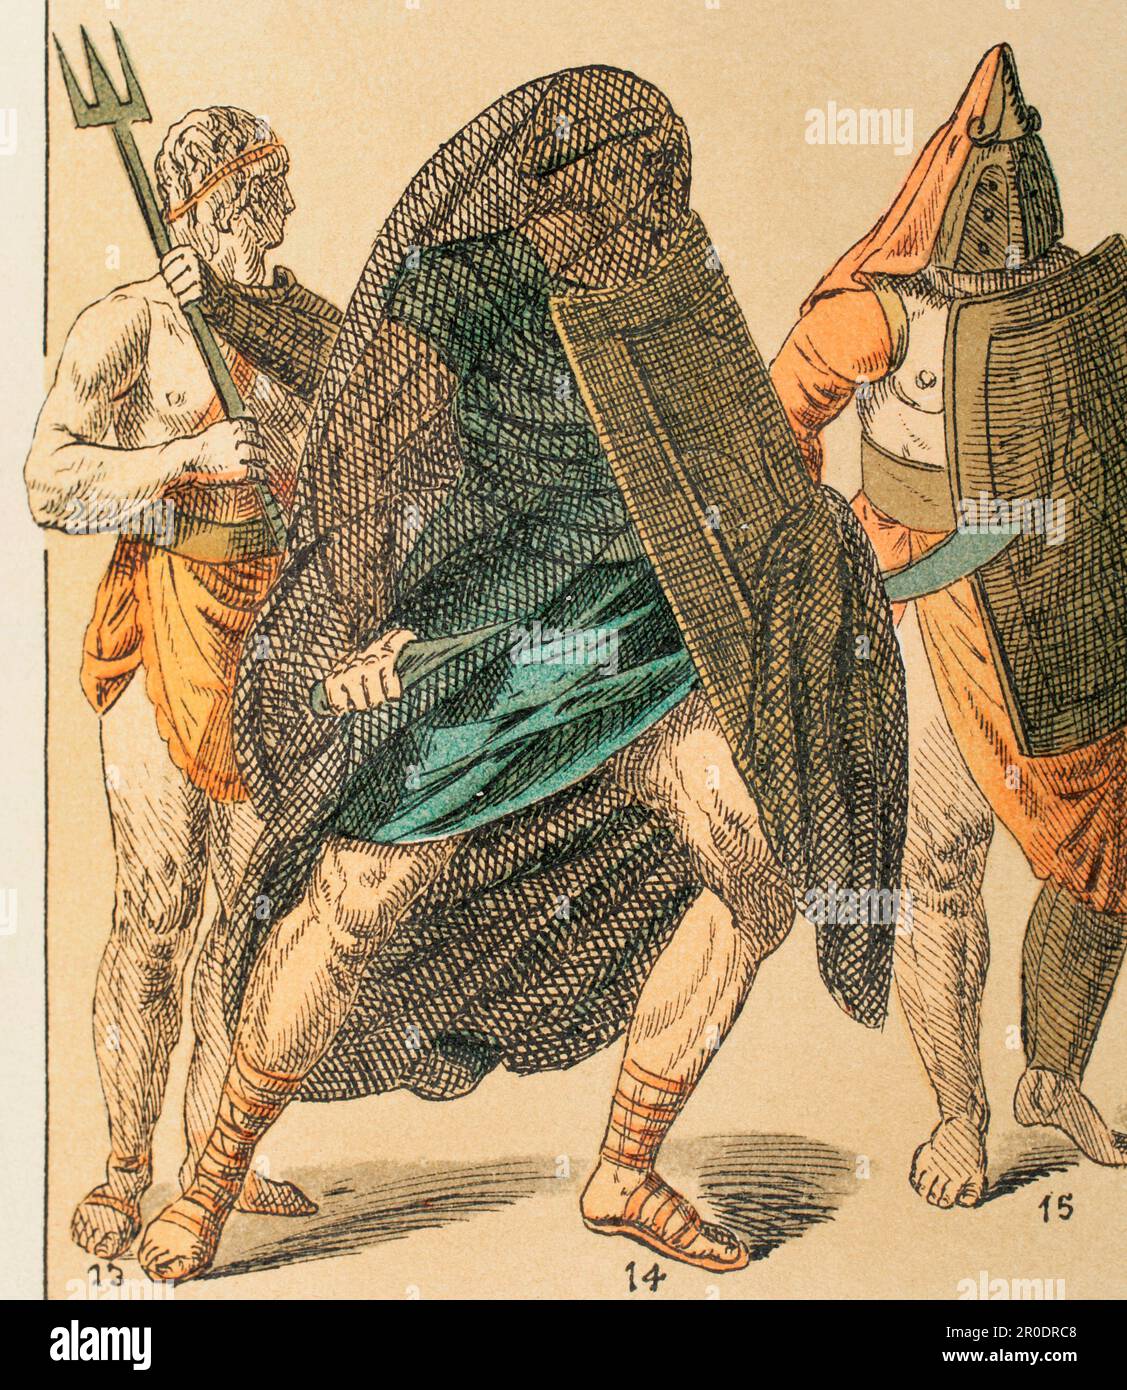 Roman Empire. Gladiators. From left to right: 13- gladiator armed with trident, 14- gladiator carrying shield and net, 15- gladiator carrying scythe, helmet and shield. Chromolithography. 'Historia Universal', by César Cantú. Volume II, 1881. Stock Photo